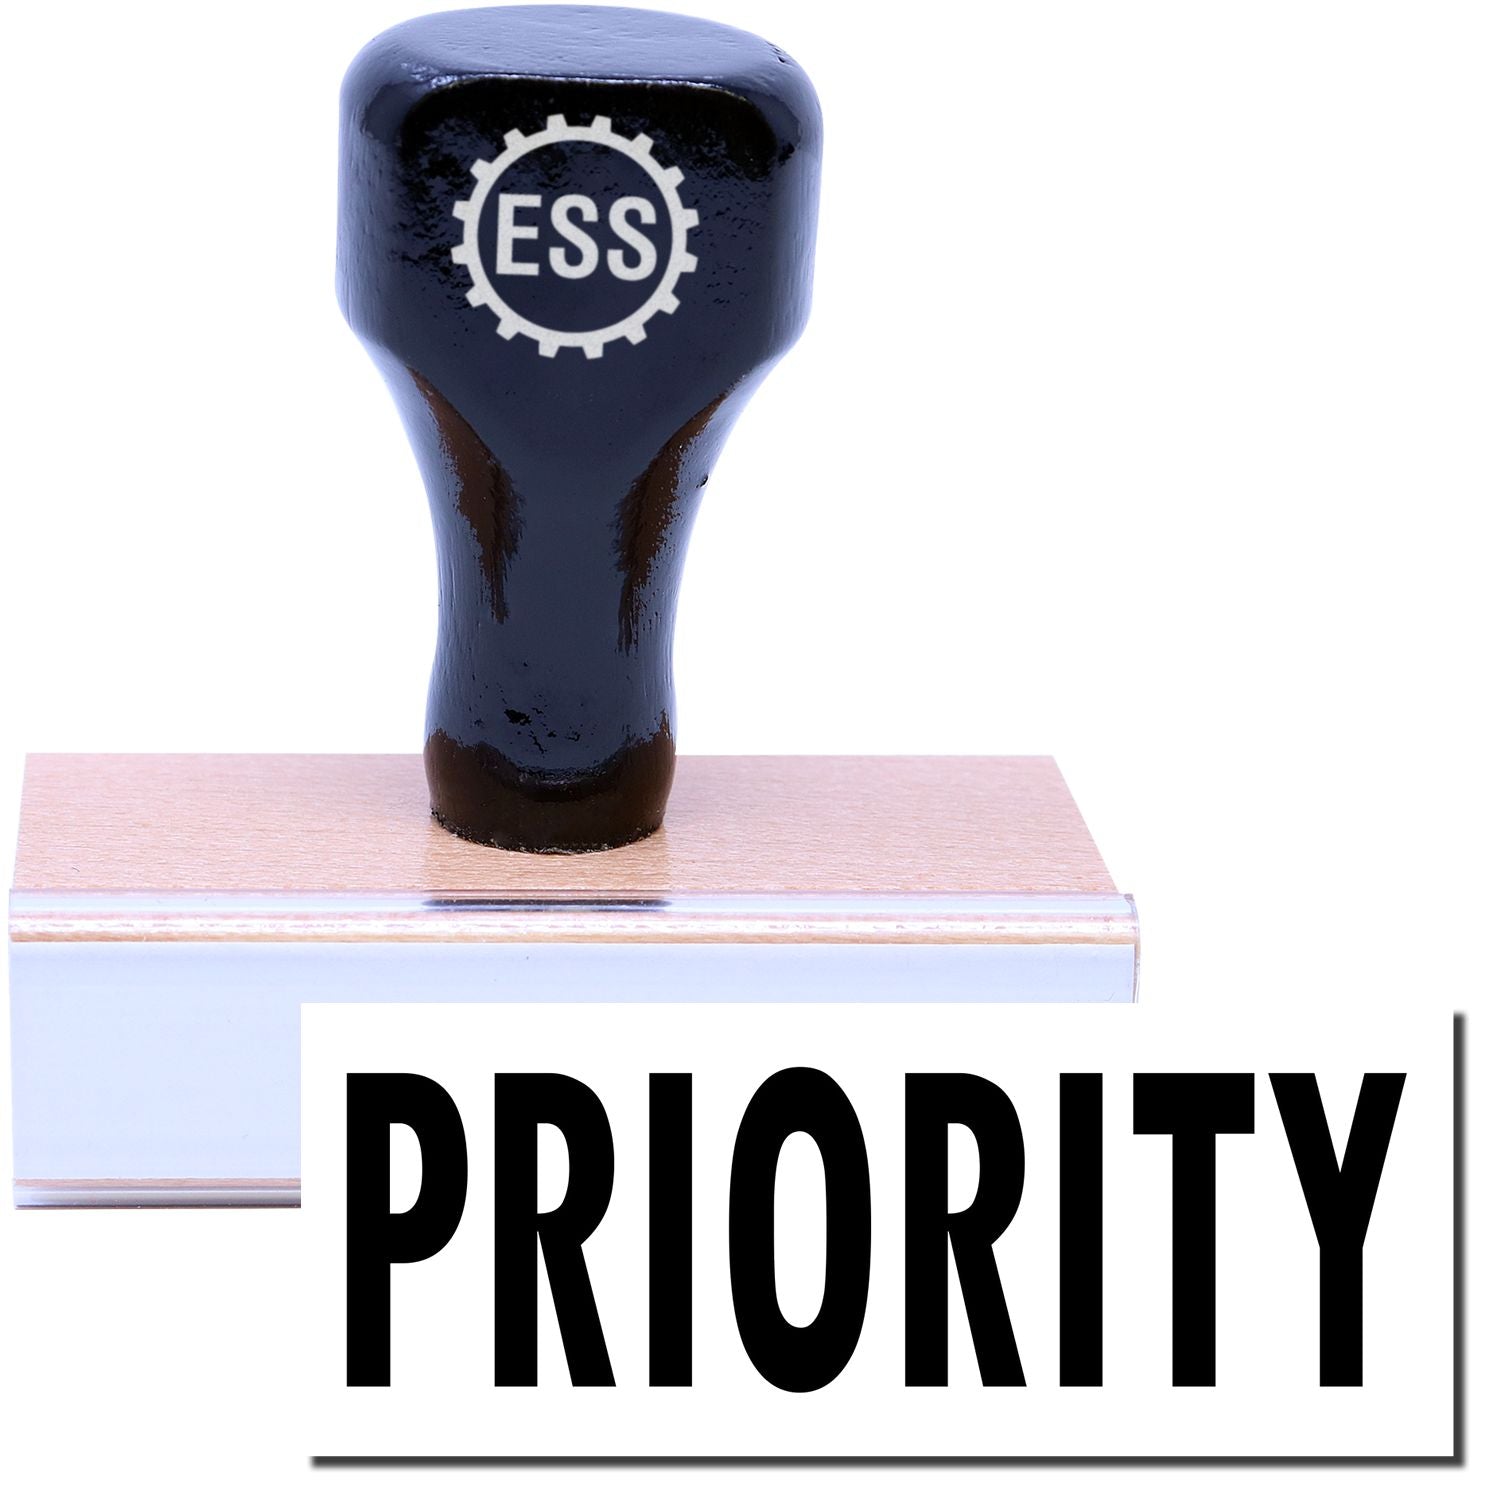 A stock office rubber stamp with a stamped image showing how the text "PRIORITY" is displayed after stamping.